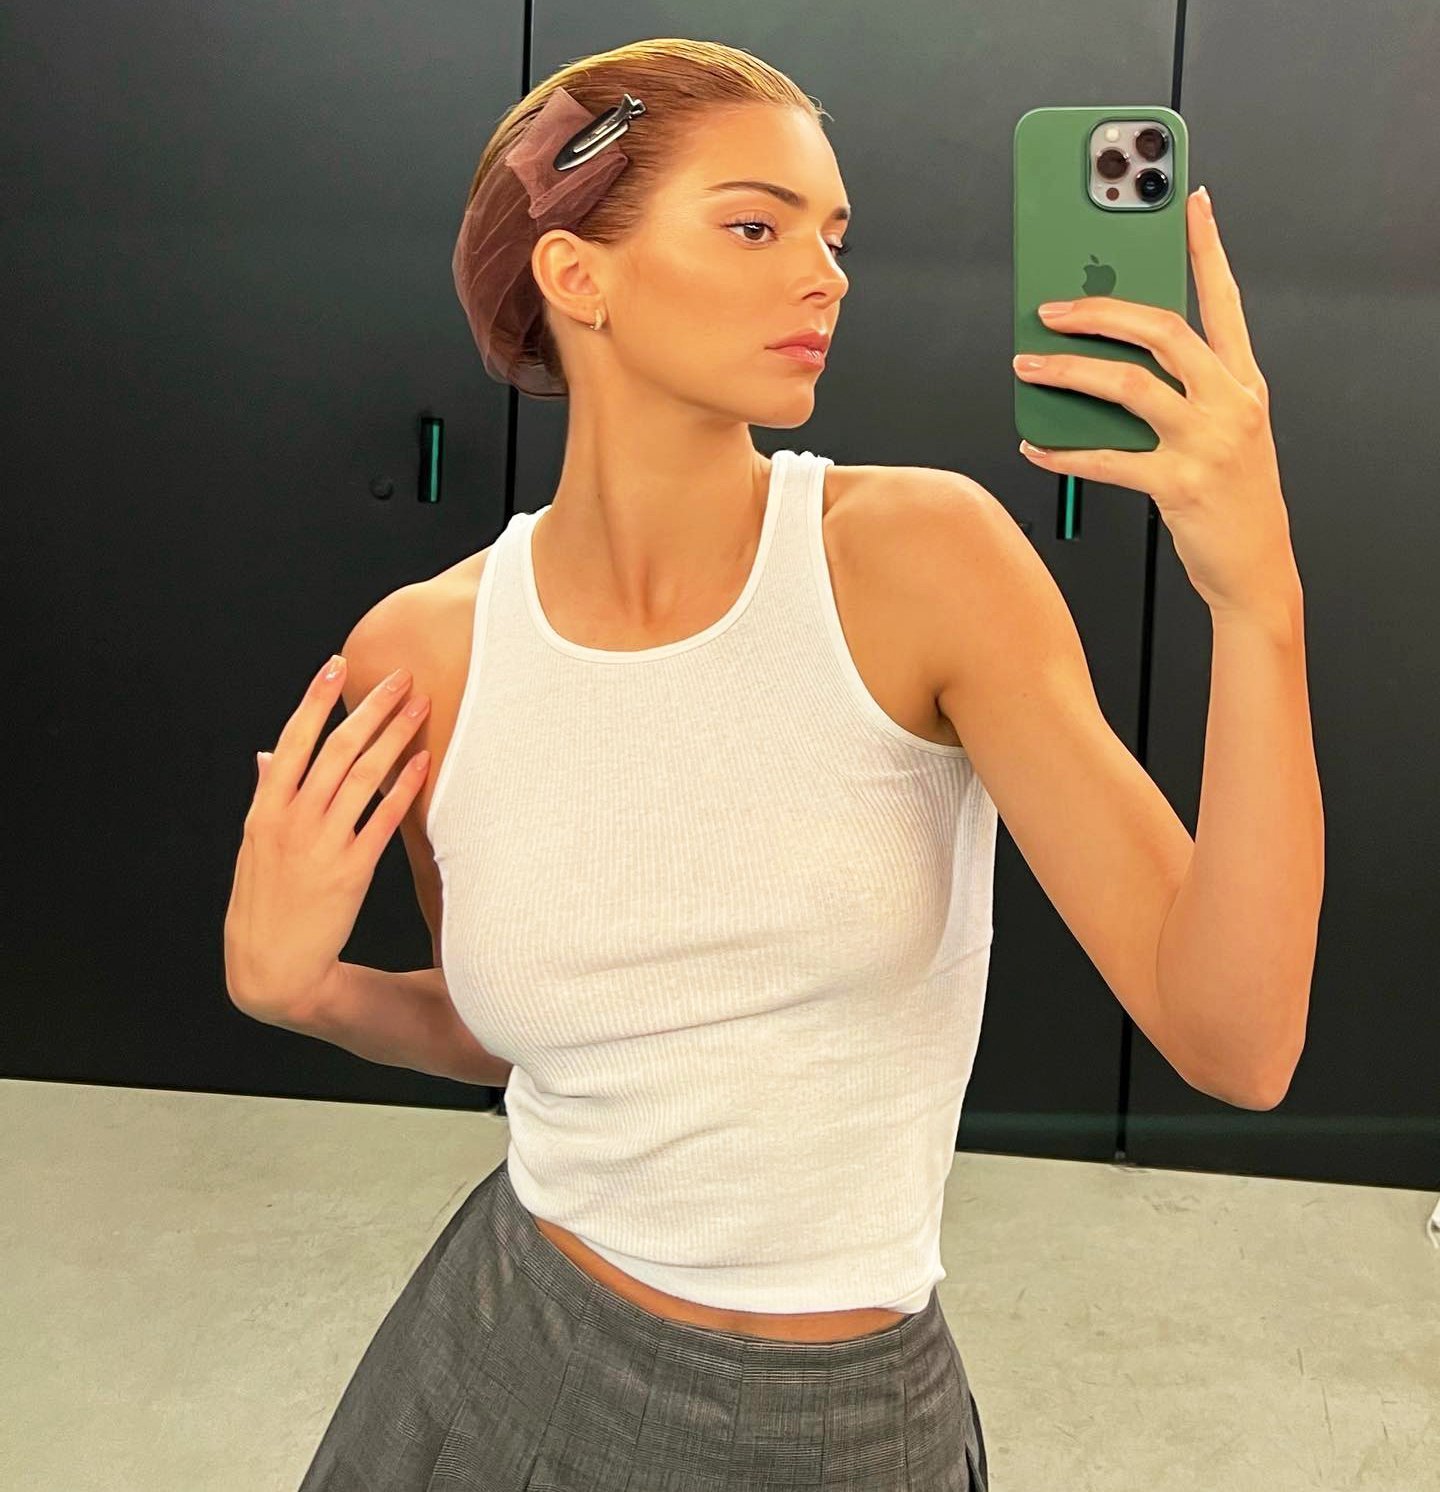 Kendall Jenner red hair